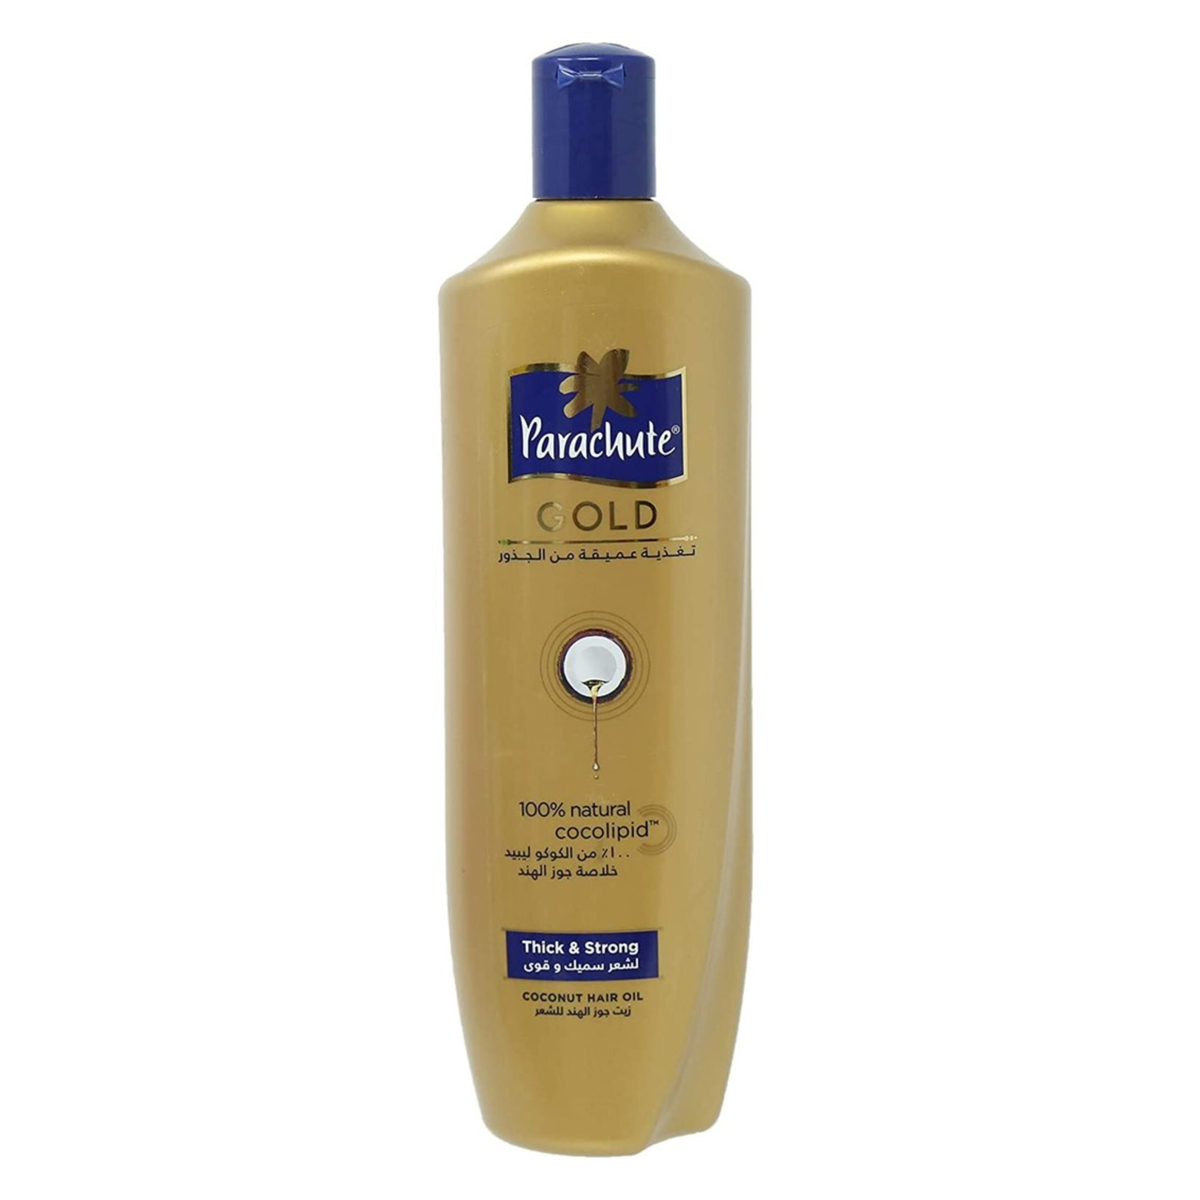 Parachute Gold Coconut Hair Oil Thick And Strong 200ml